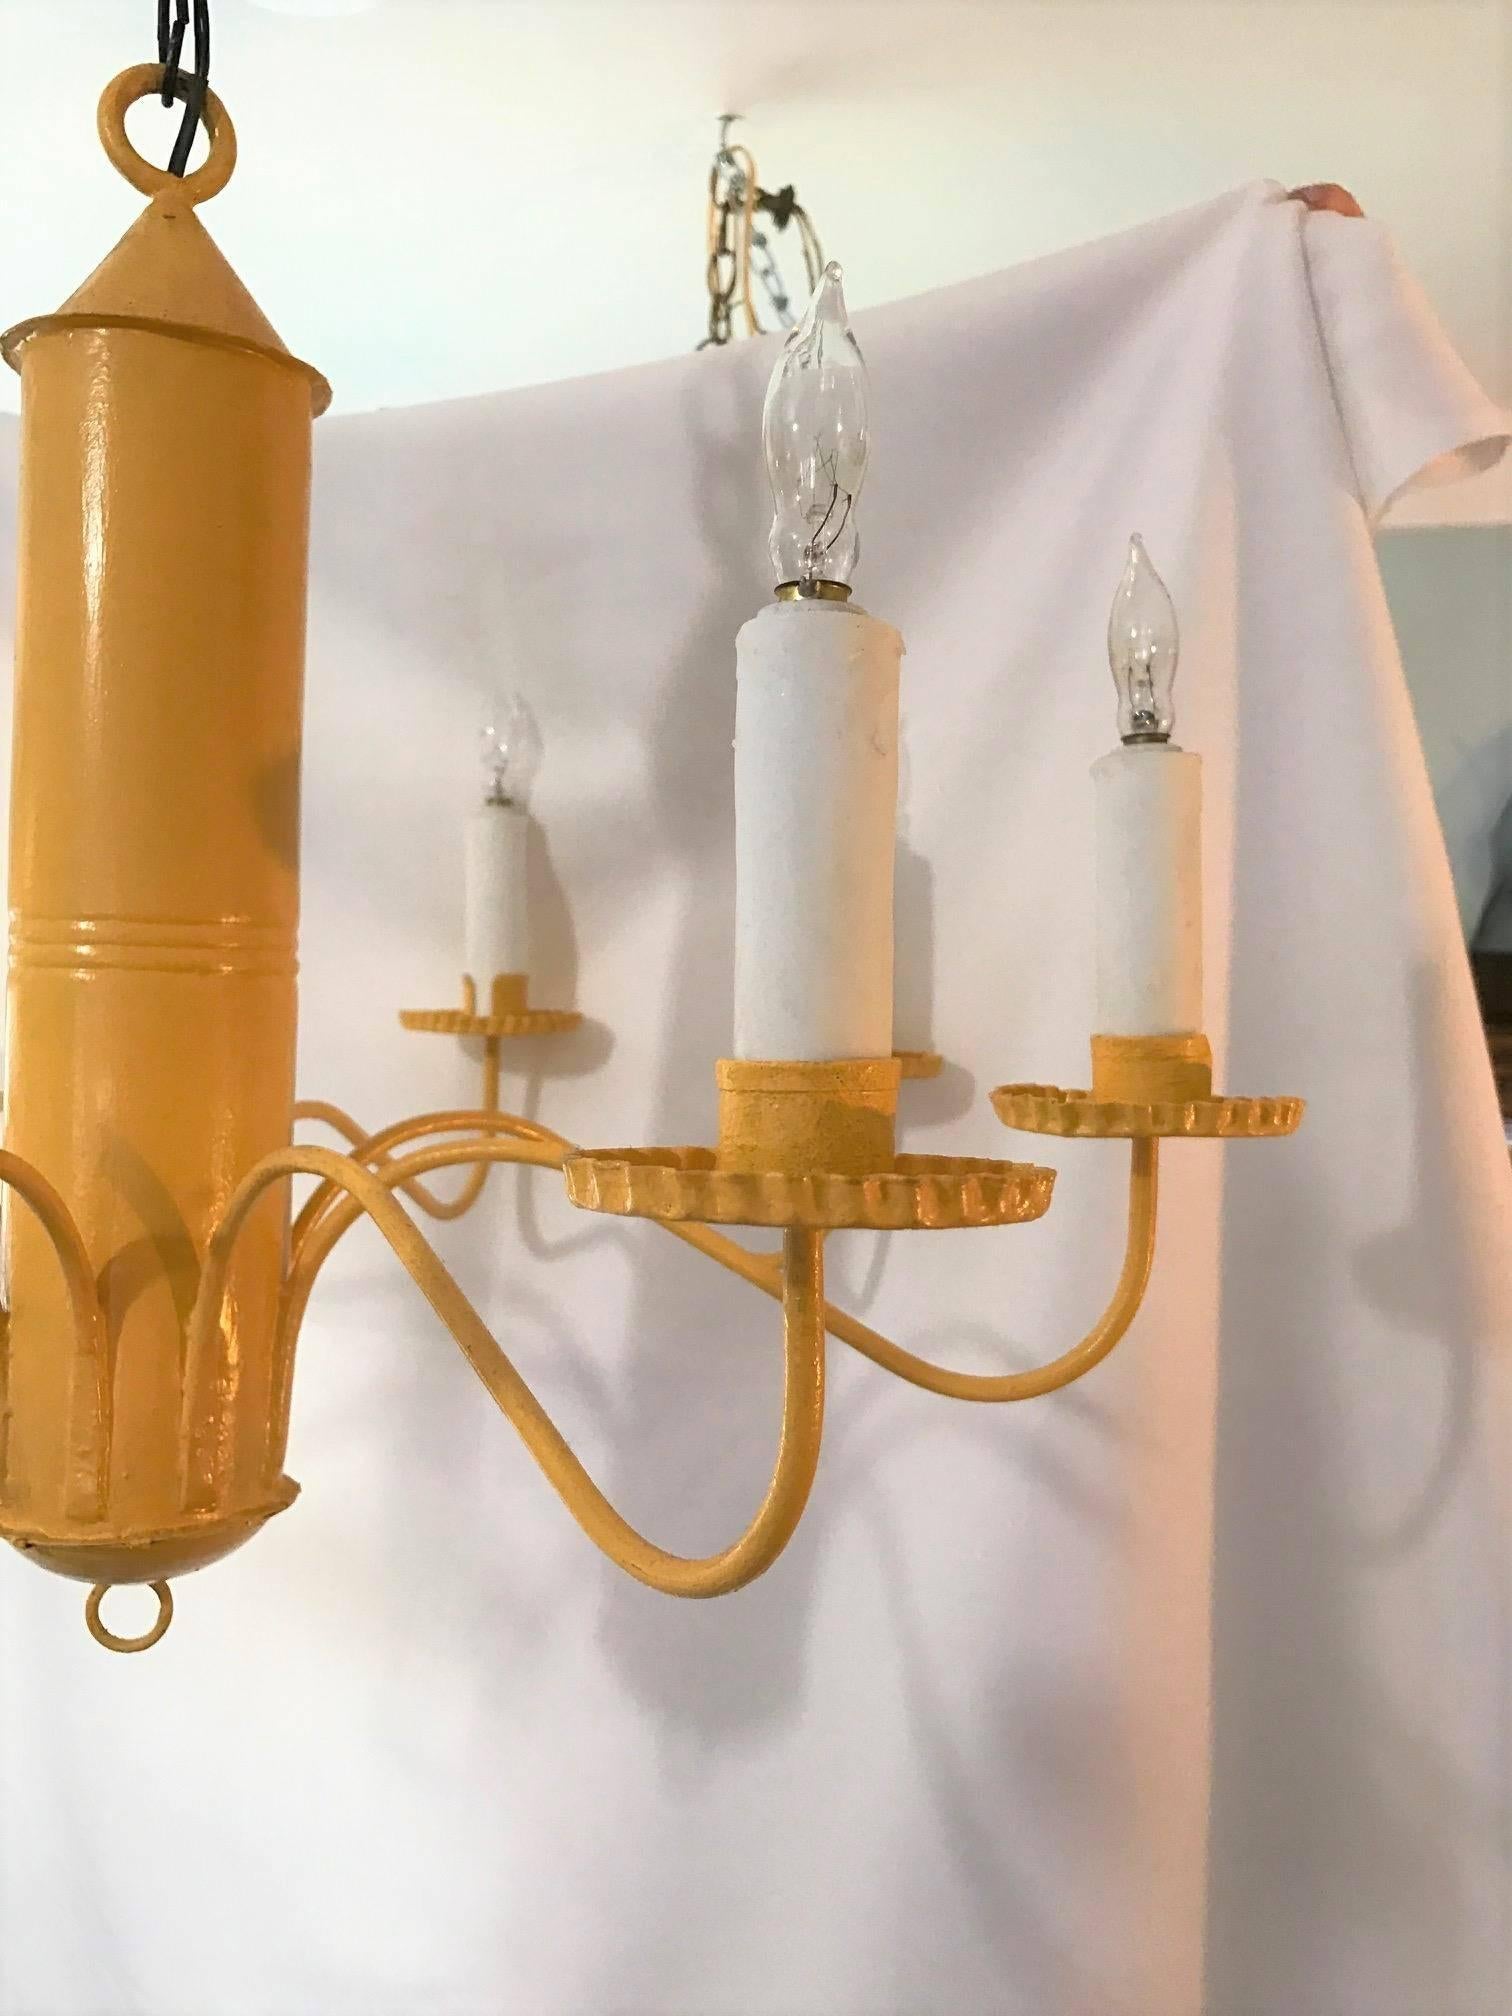 Mid-Century Modern ON SALE NOW! ON SALE NOW! Hand-Forged Buttercup Yellow Barrel Chandelier